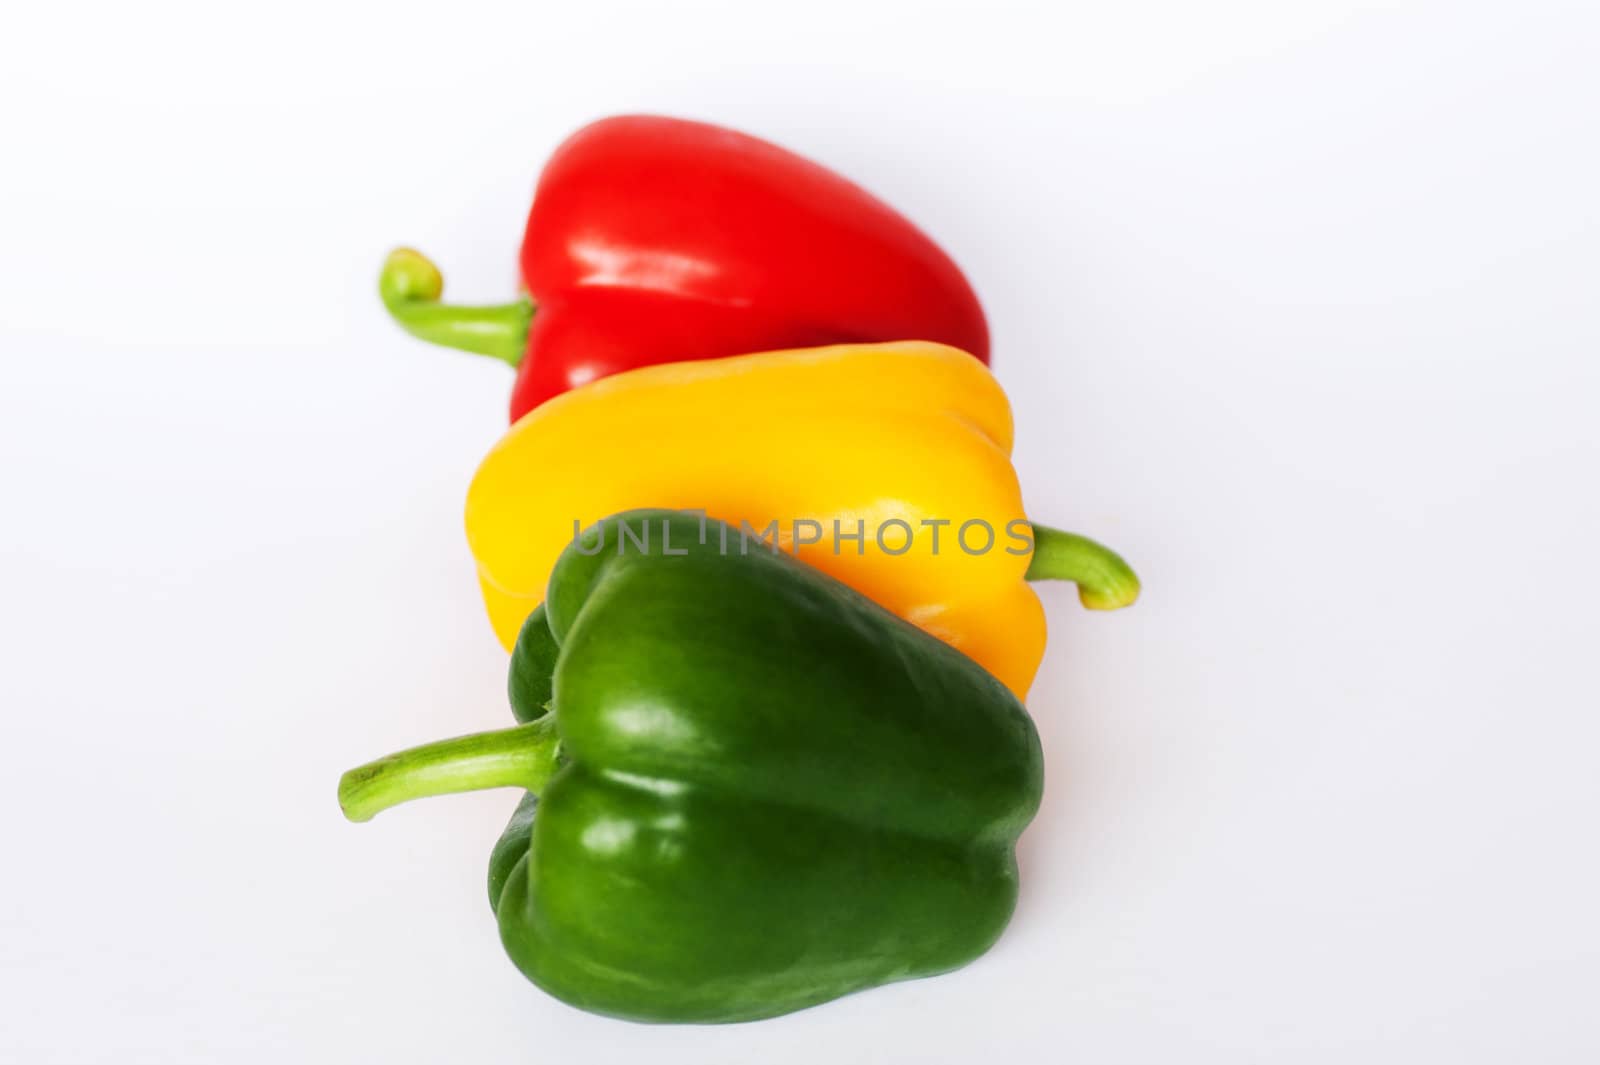 Red green and yellow peppers arranged like a traffic light